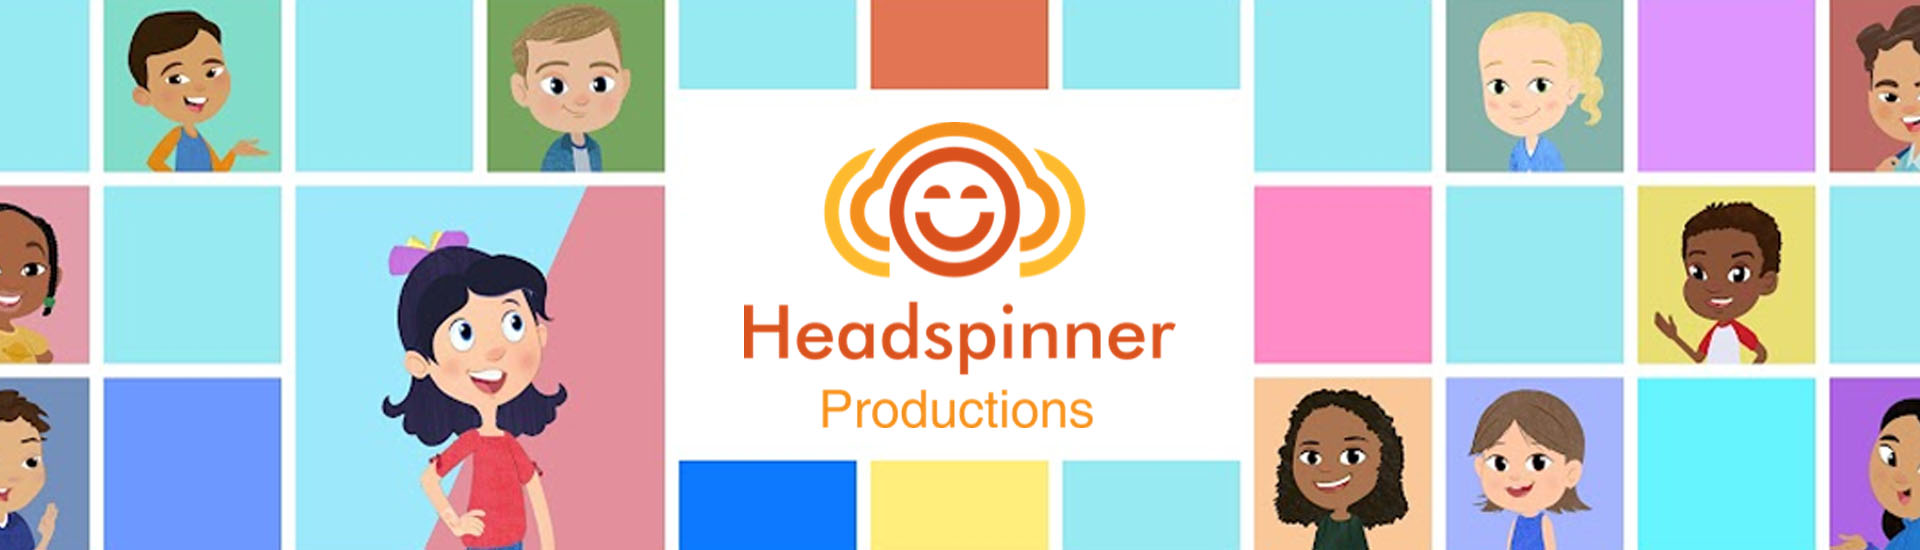 Image for Headspinner Productions